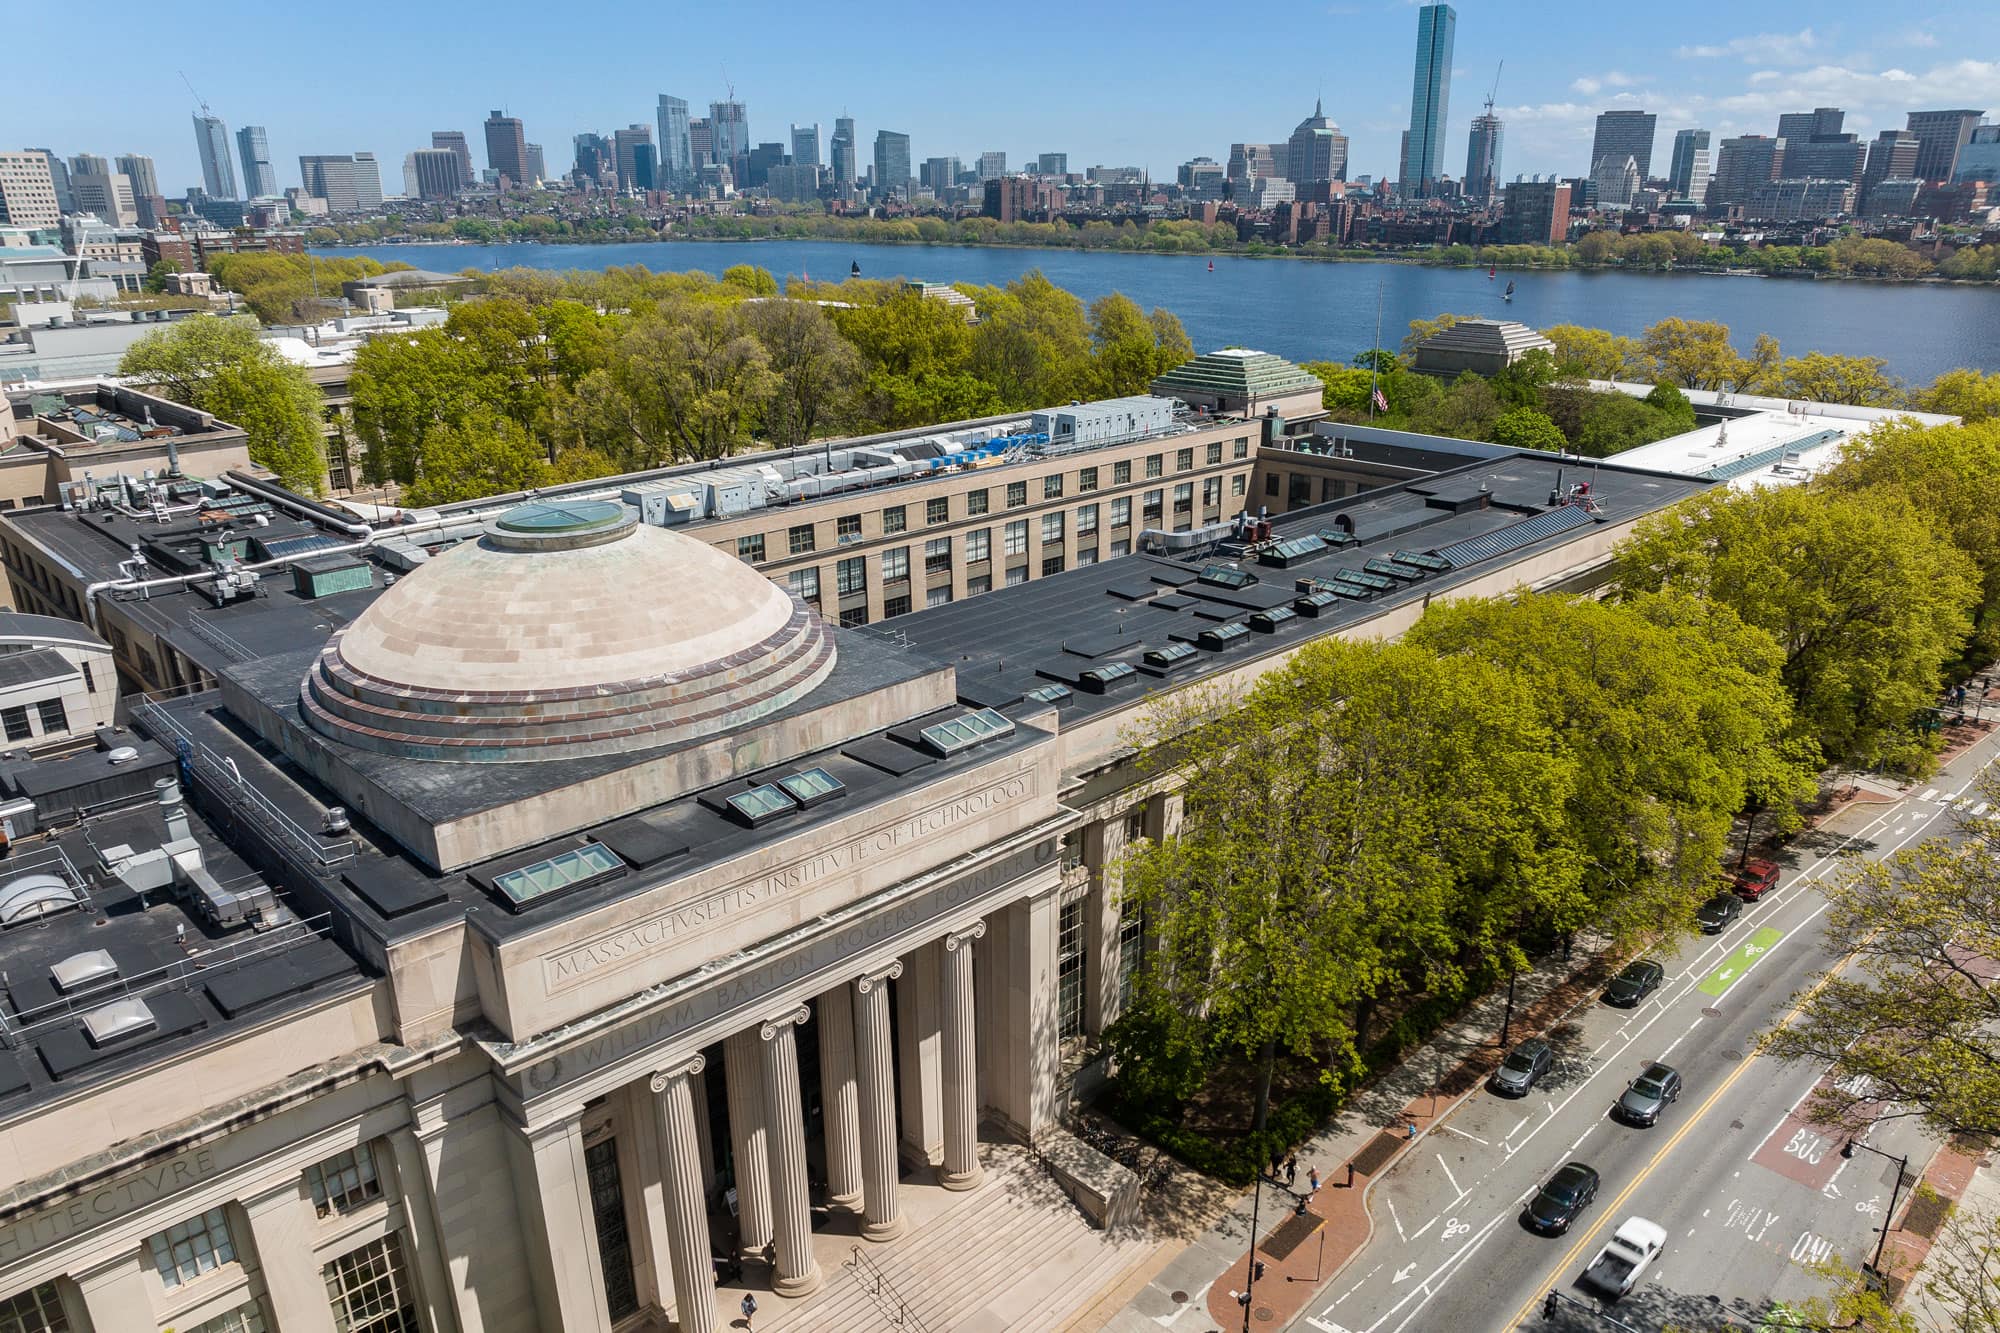 Massachusetts Institute of Technology with city in background